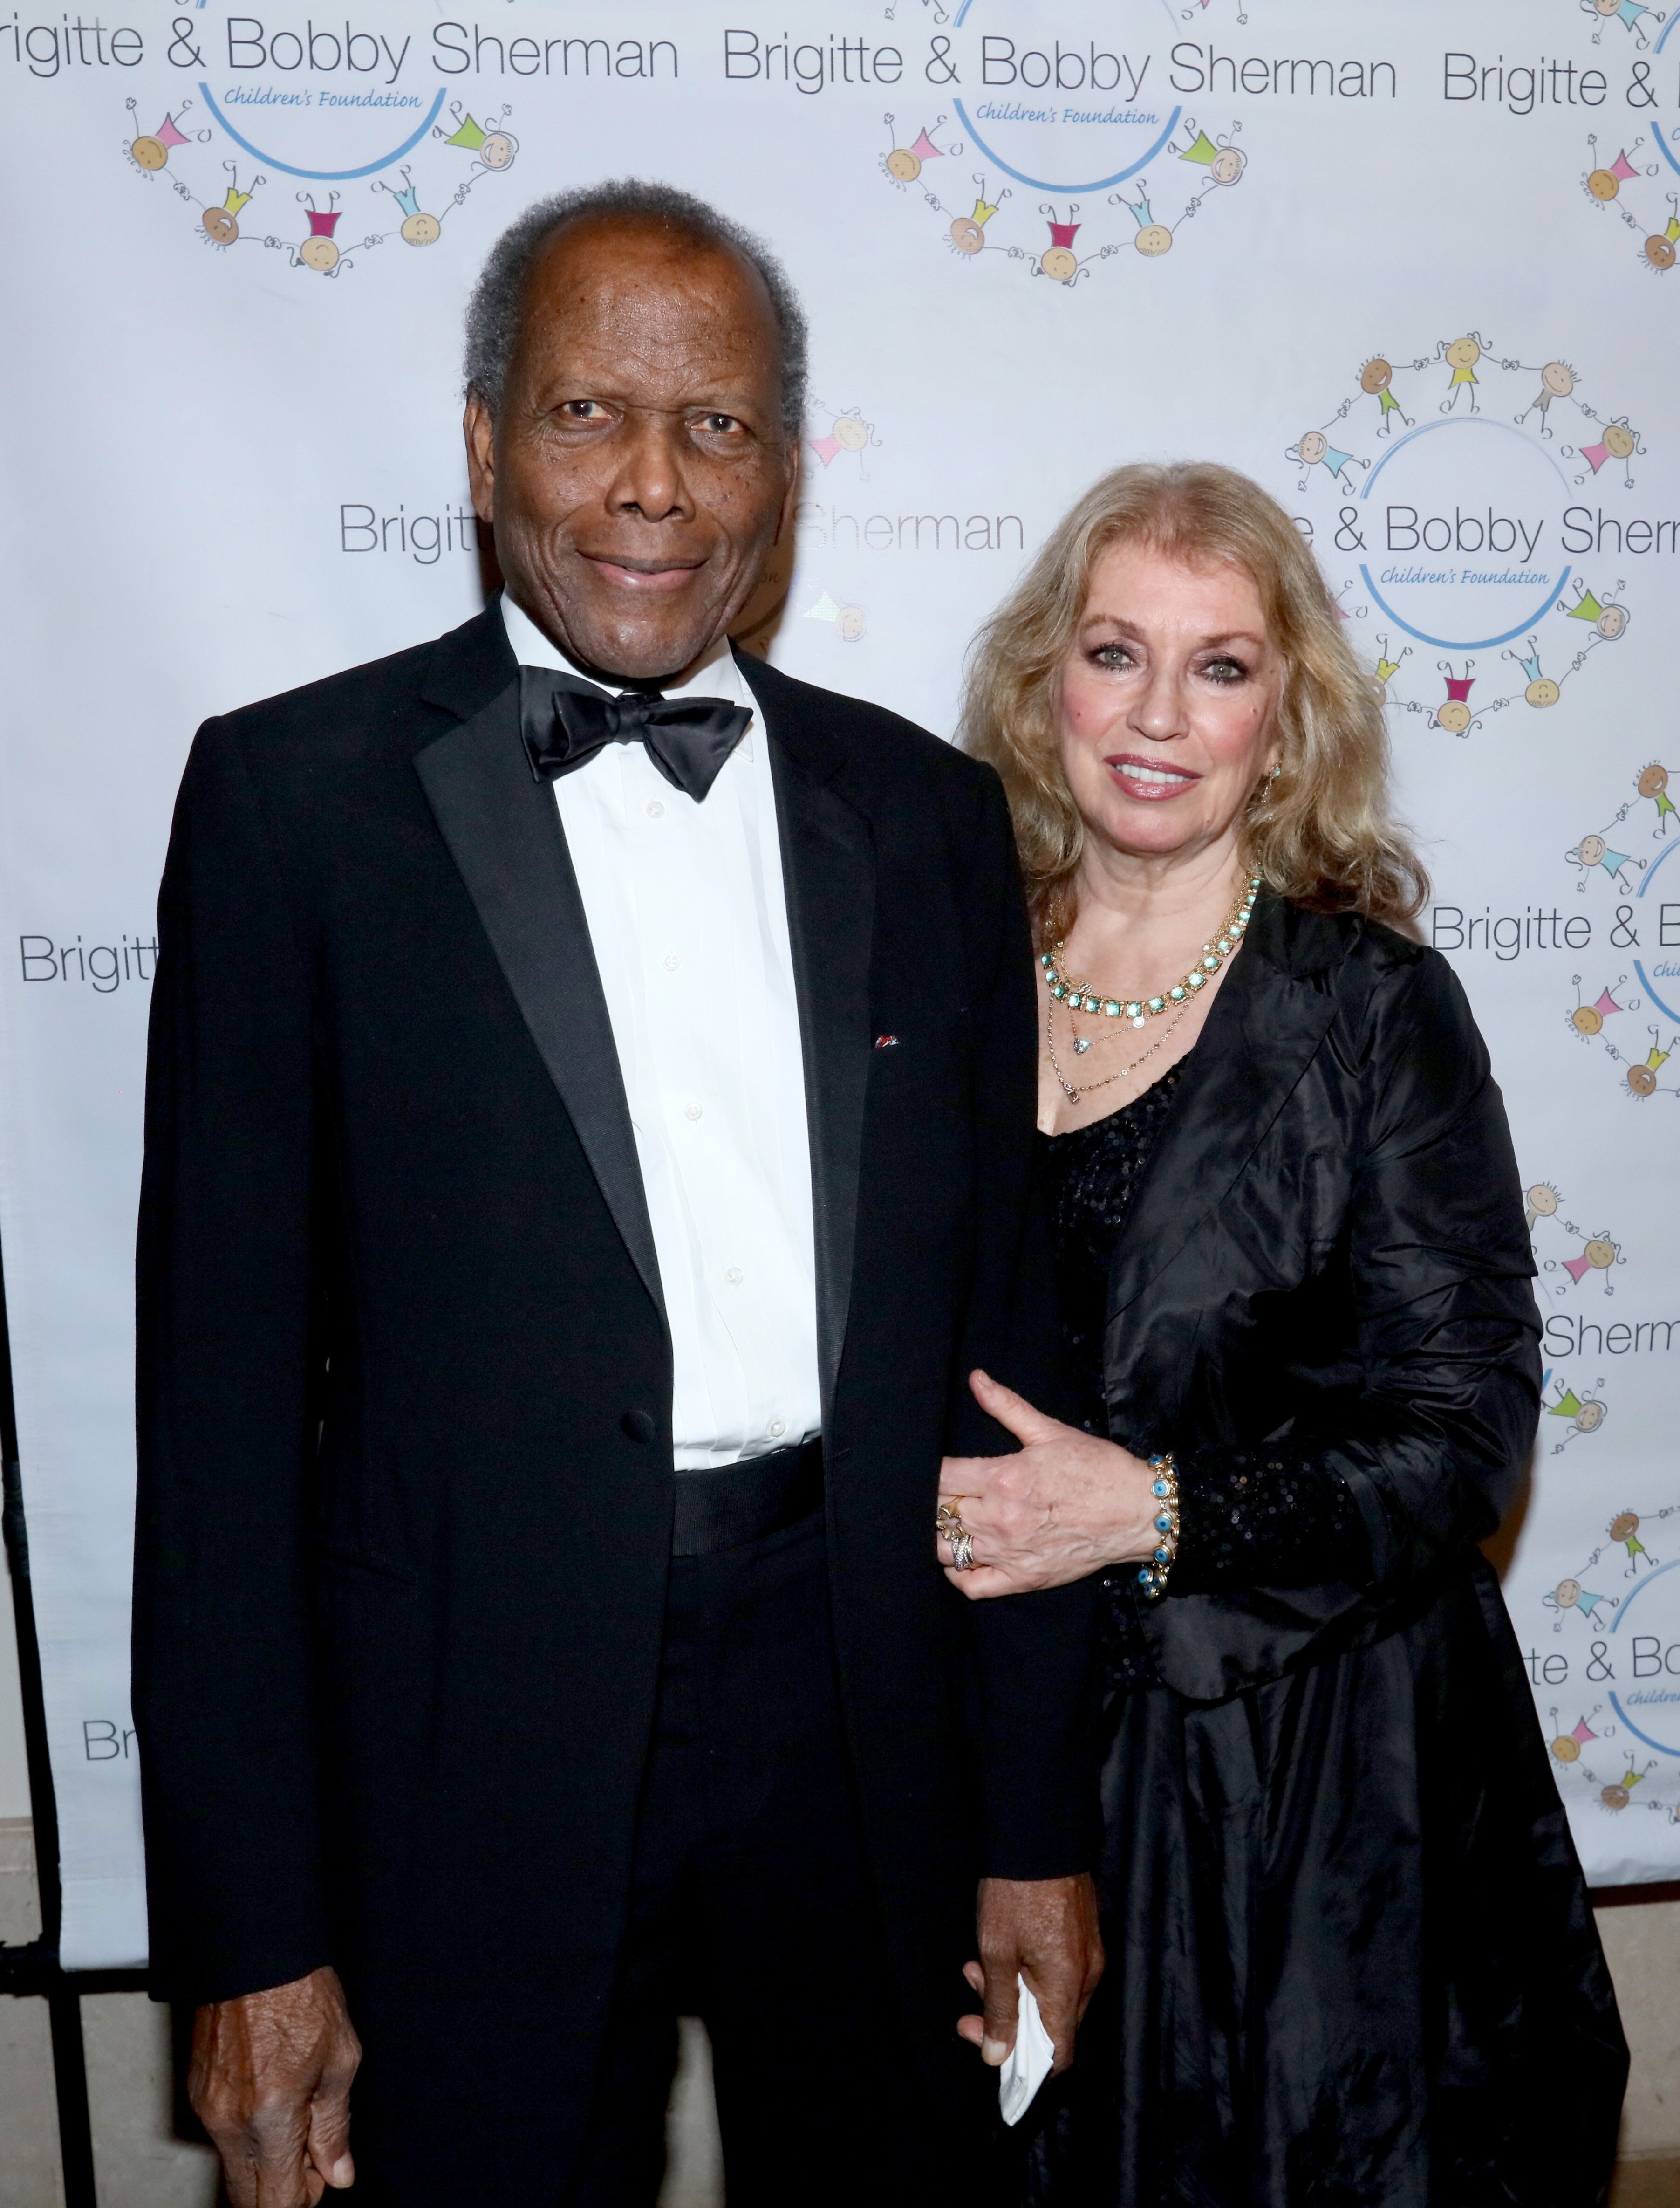  Sidney Poitier and Joanna Shimkus attend the Brigitte and Bobby Sherman Children's Foundation's 6th Annual Christmas Gala and Fundraiser, 2015 Beverly Hills, California. | Photo: Getty Images